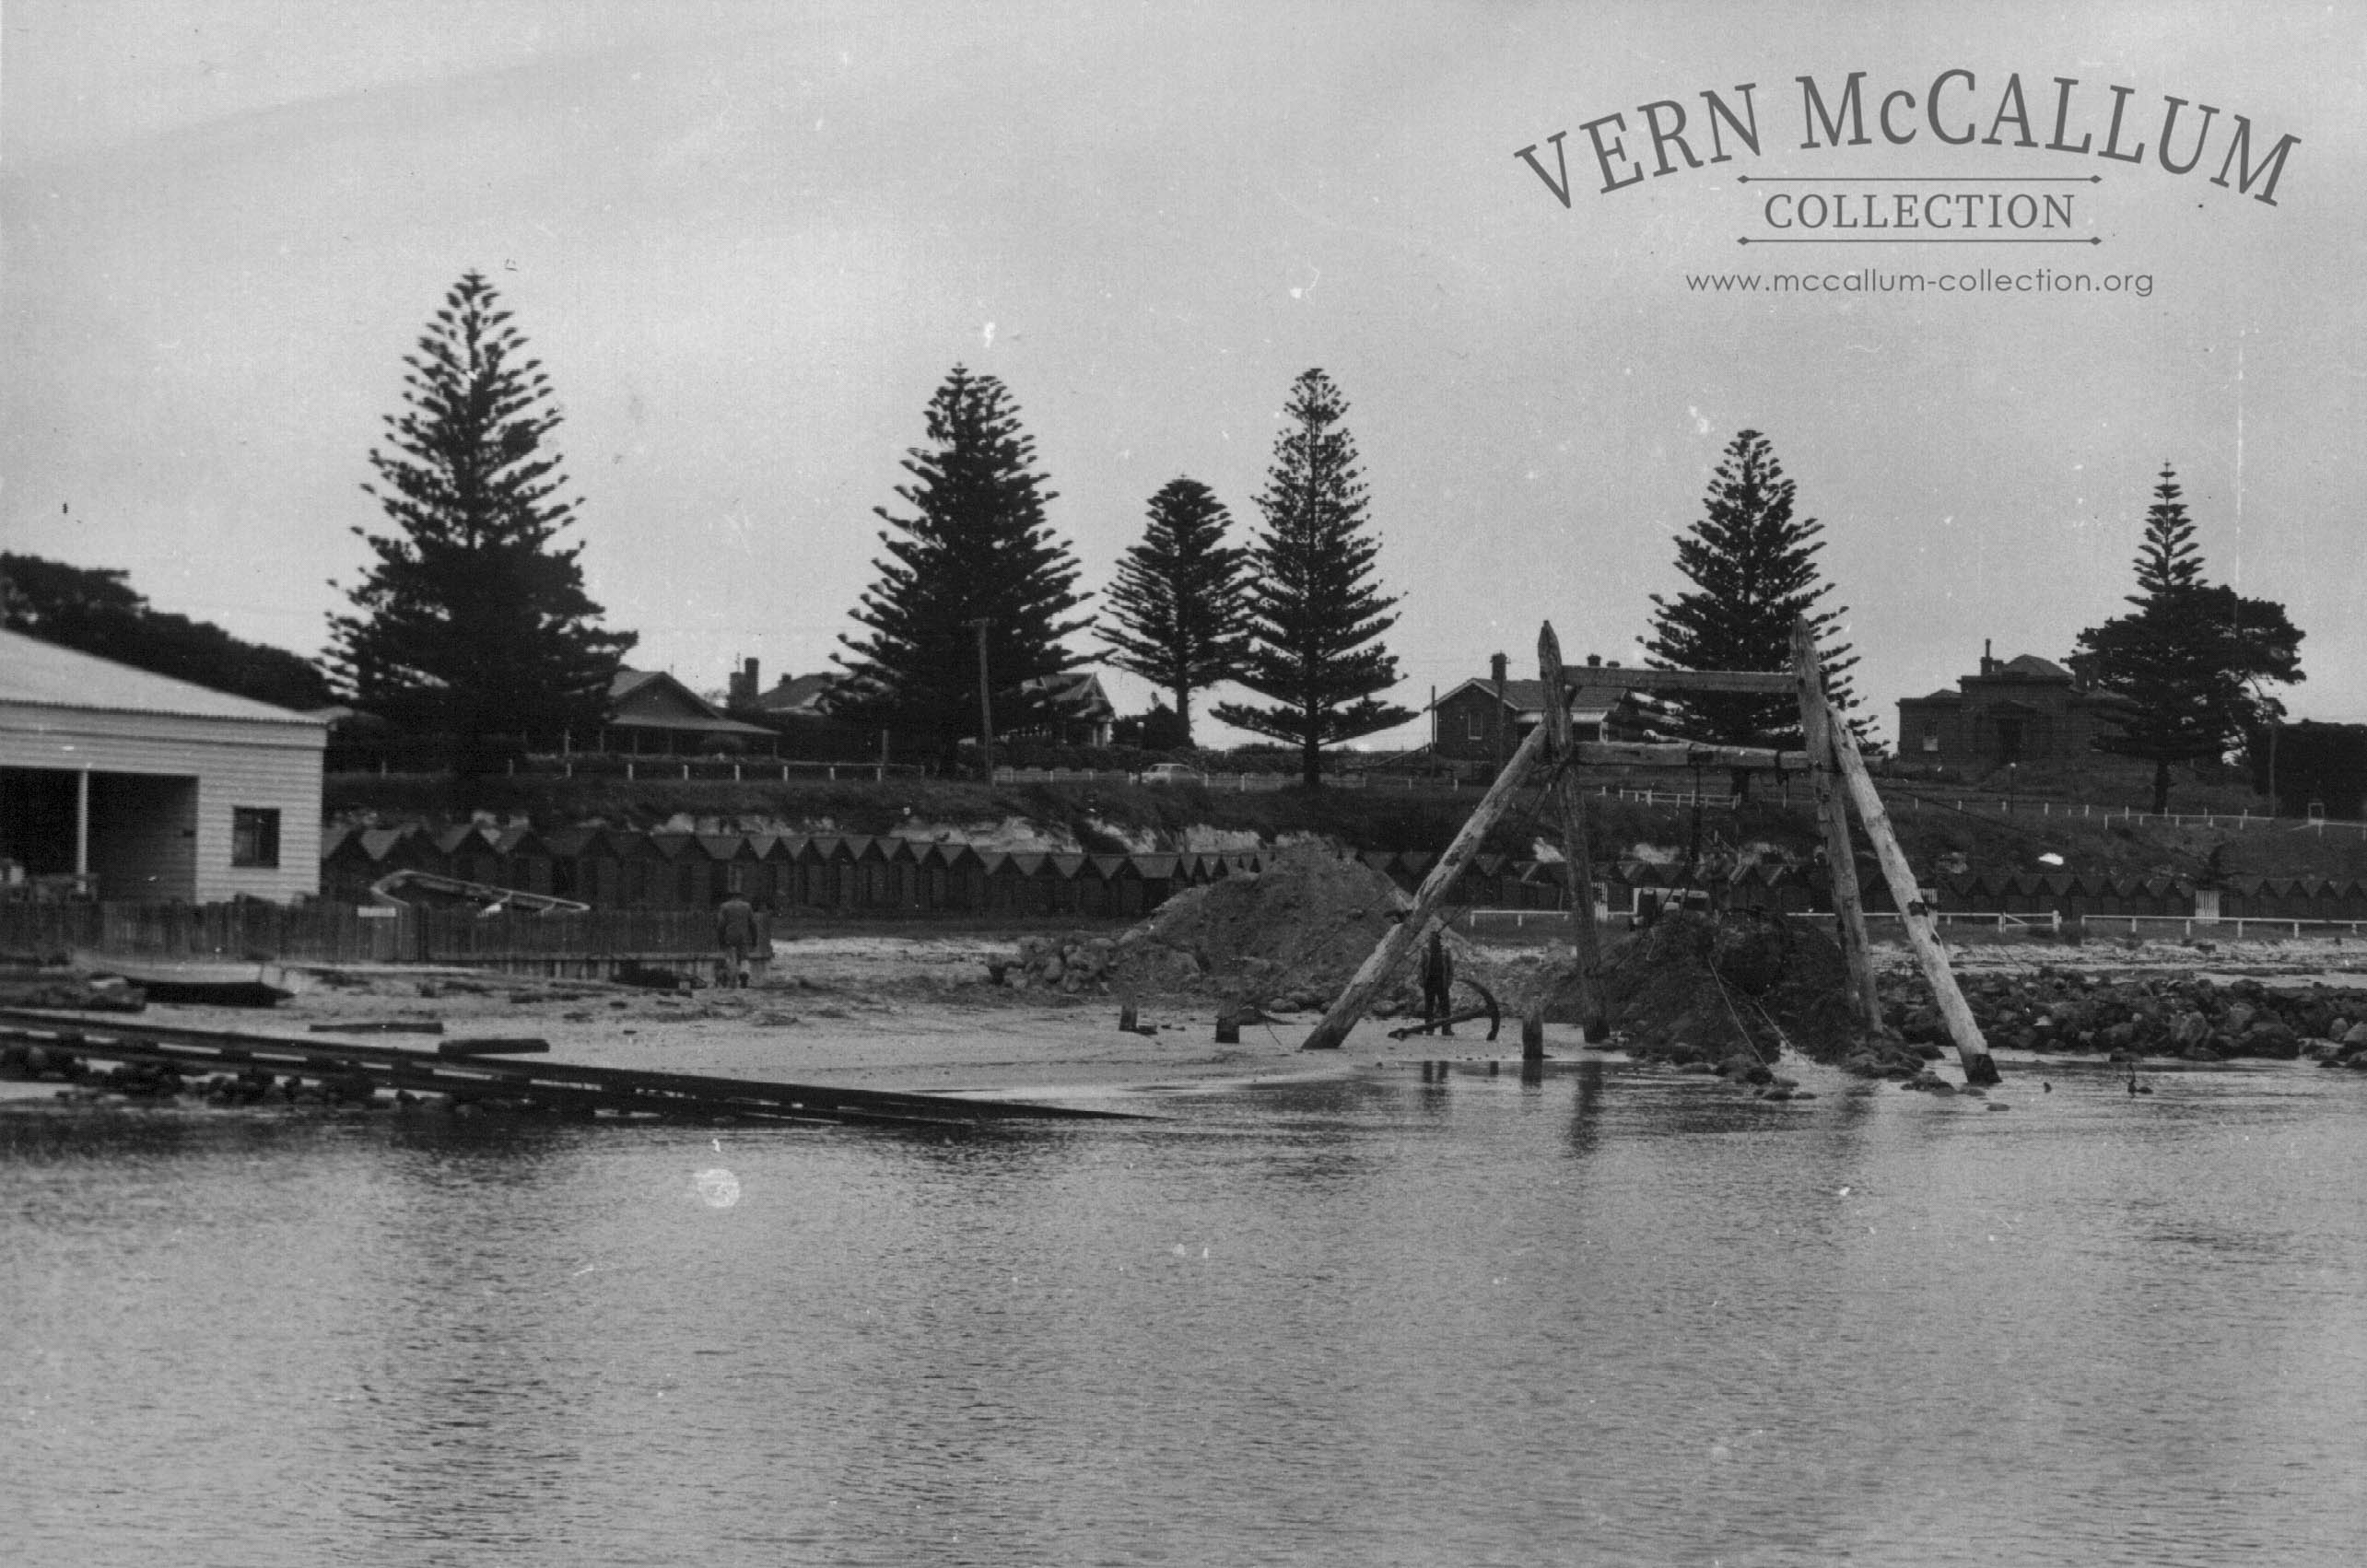 Construction of the boat slip for Ron Stewart's (the boat builder) jetty, Portland.